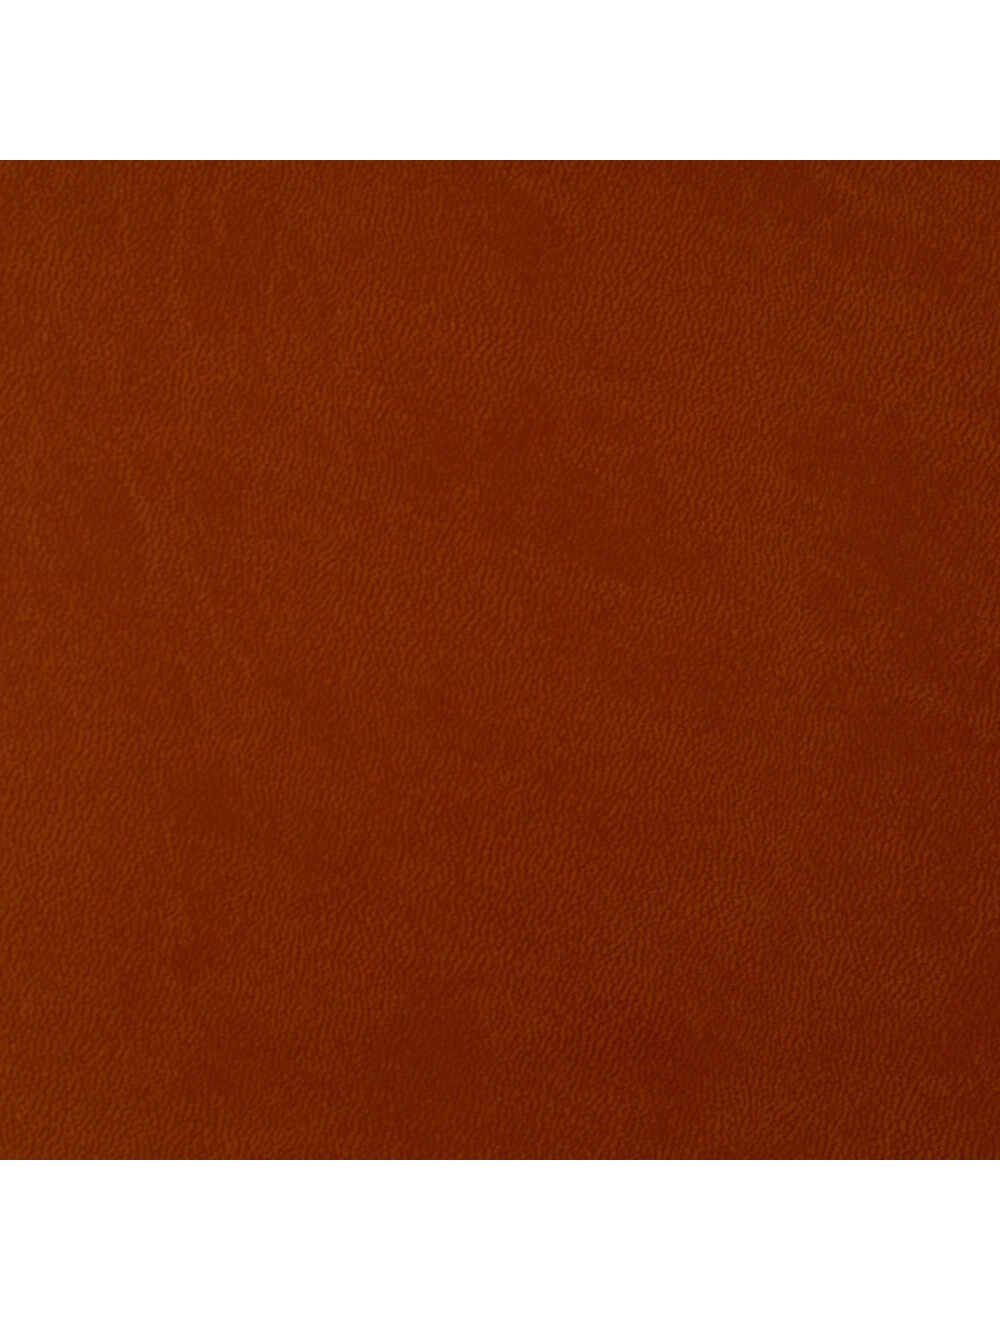 Rome Terracotta Material Swatch (4655)